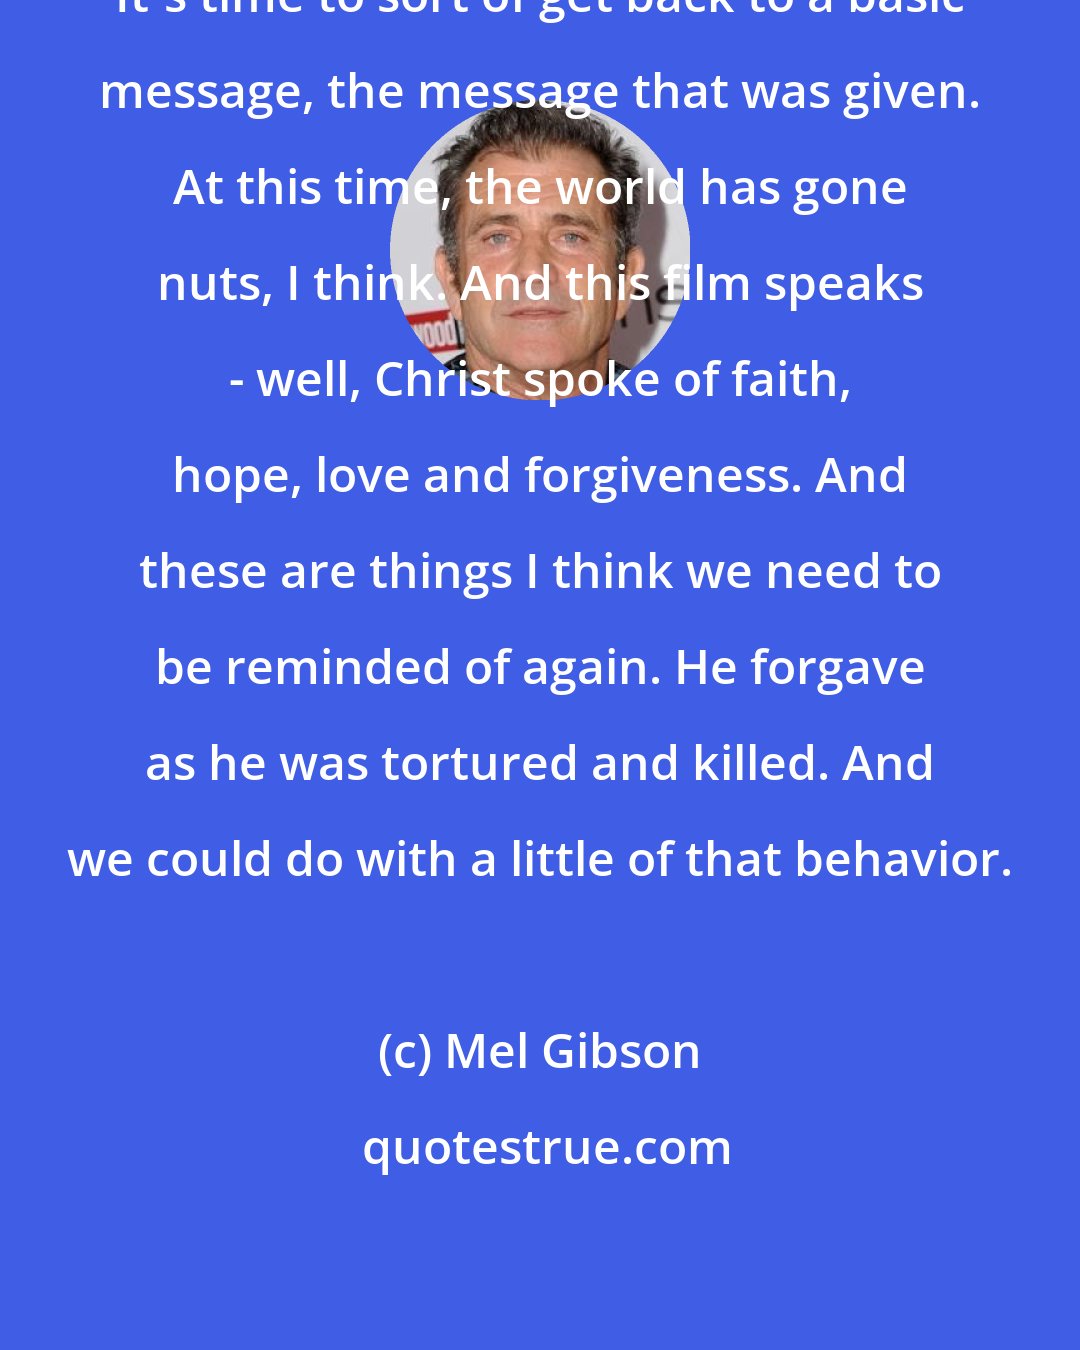 Mel Gibson: It's time to sort of get back to a basic message, the message that was given. At this time, the world has gone nuts, I think. And this film speaks - well, Christ spoke of faith, hope, love and forgiveness. And these are things I think we need to be reminded of again. He forgave as he was tortured and killed. And we could do with a little of that behavior.